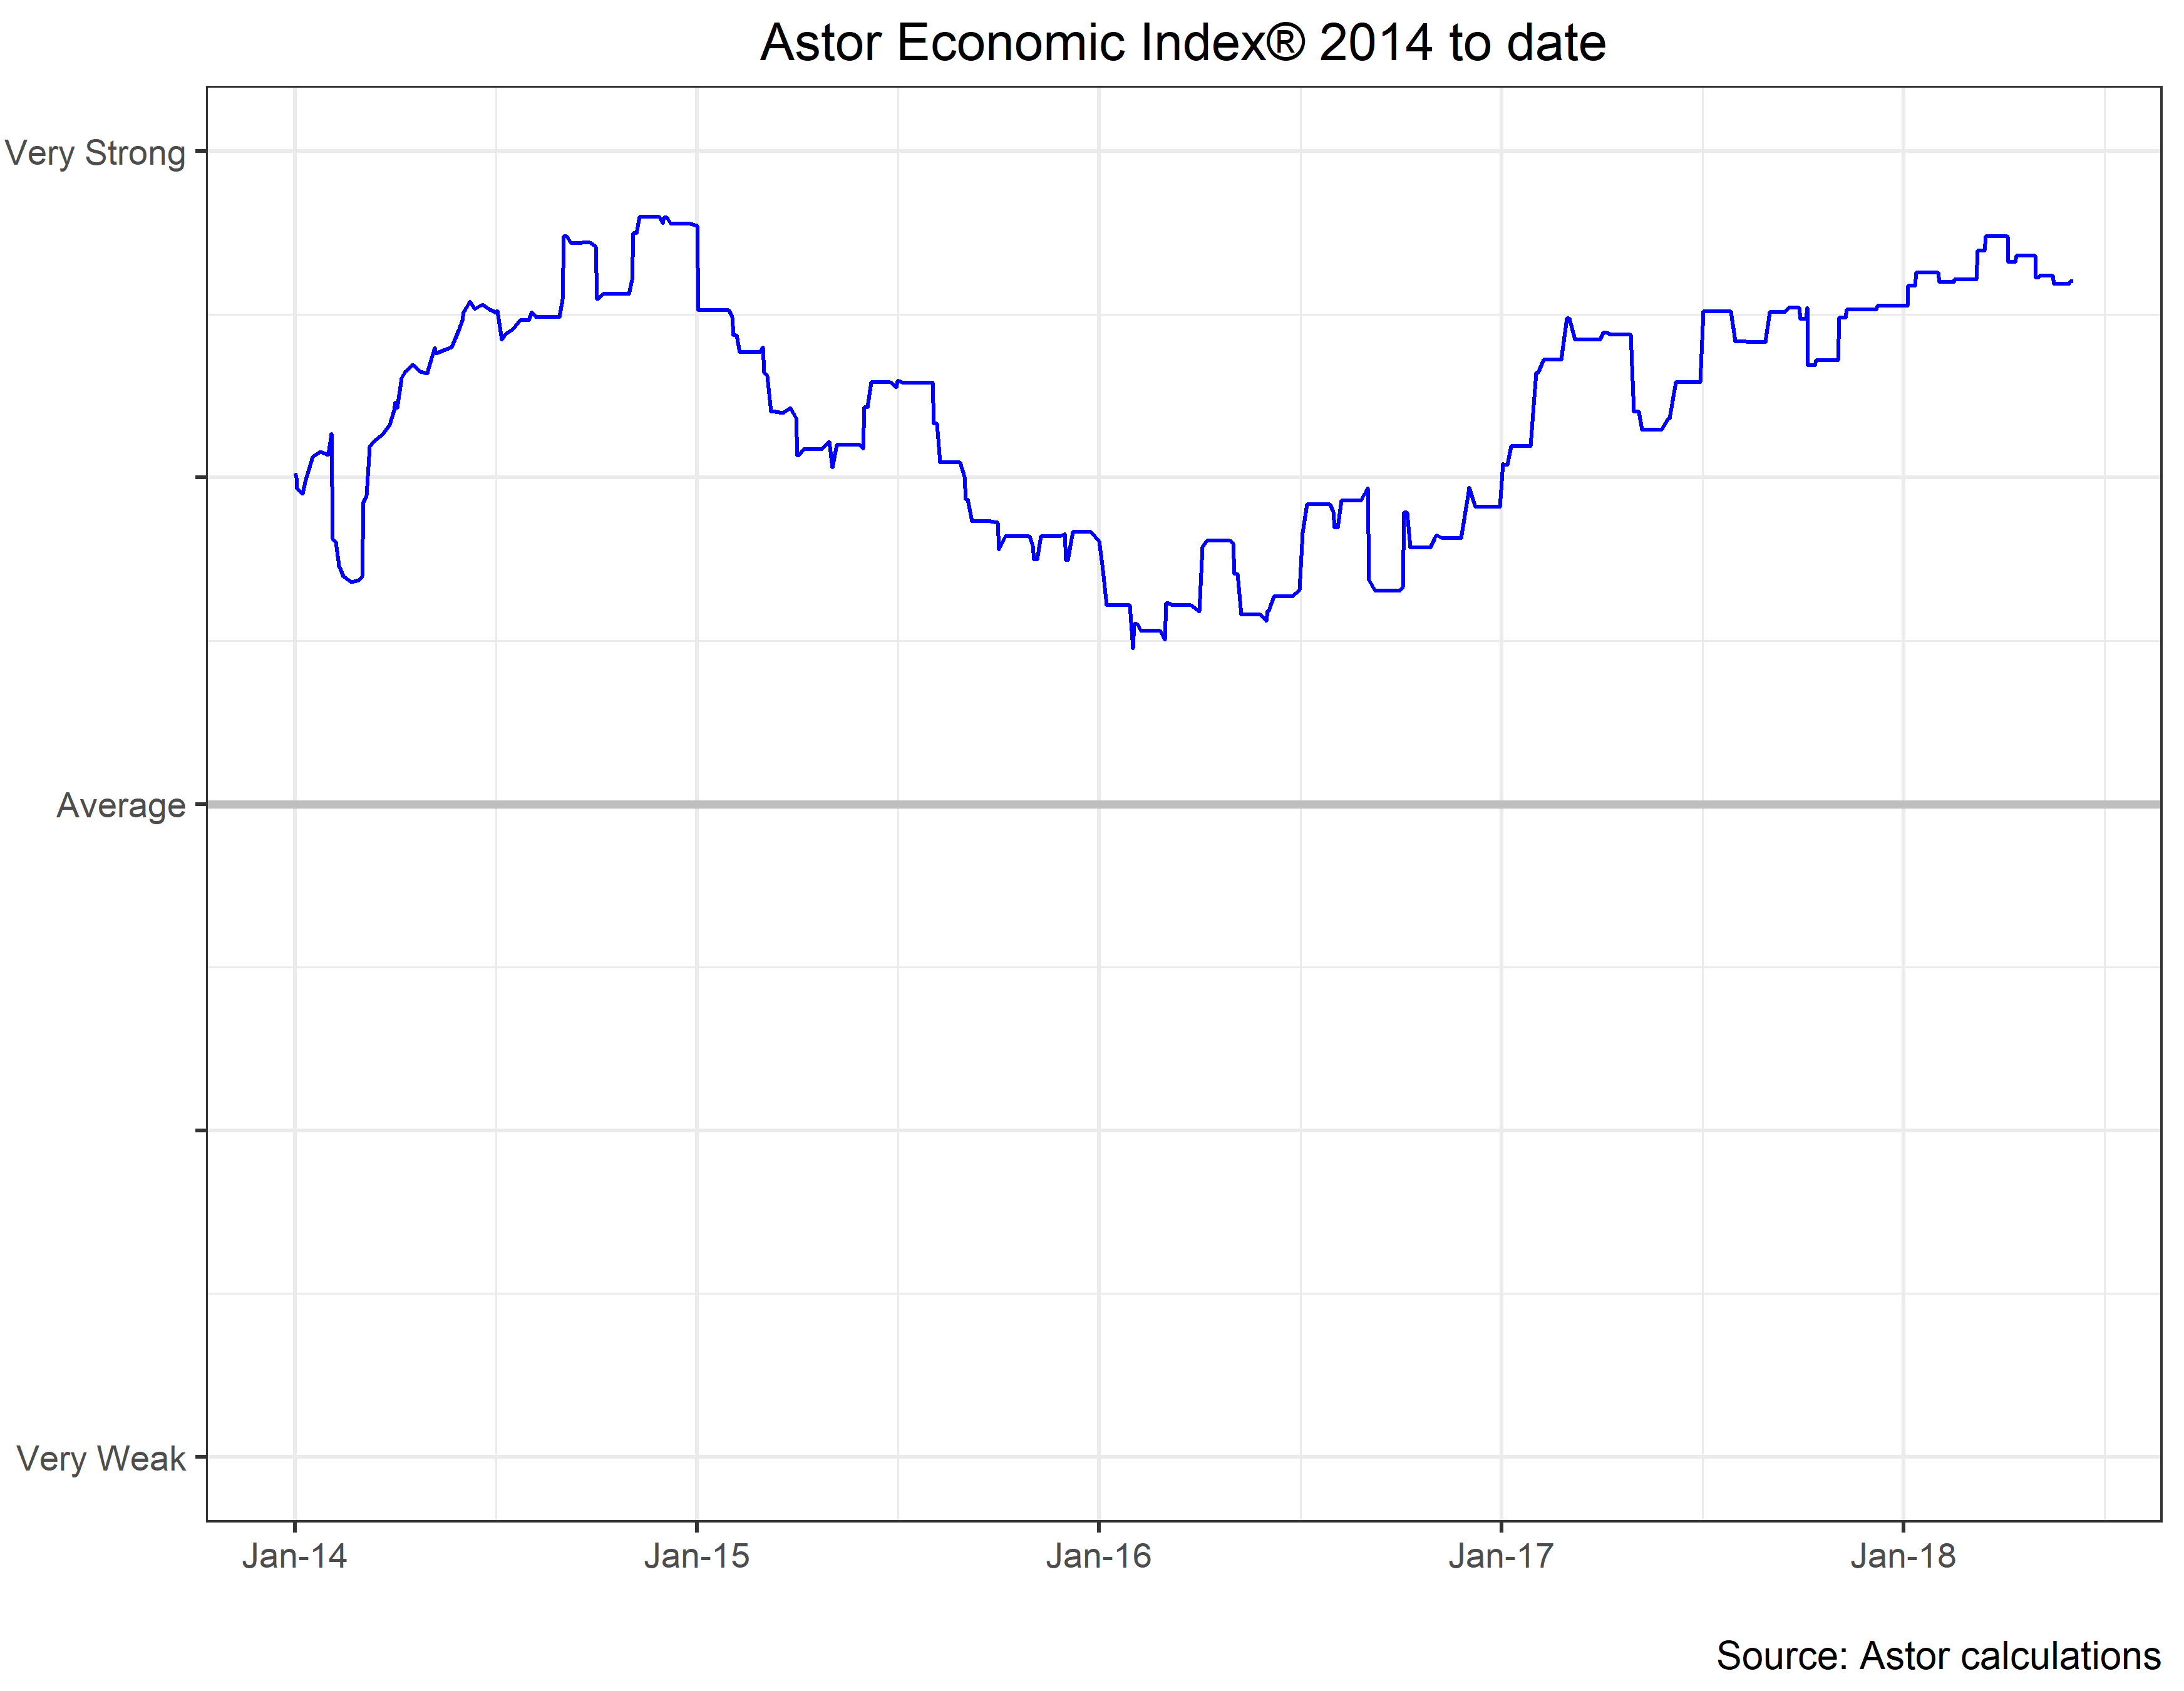 Our proprietary Astor Economic Index® is still showing strong growth in the US economy. The index is currently near the top of the fairly narrow range it has been in the last twelve months.